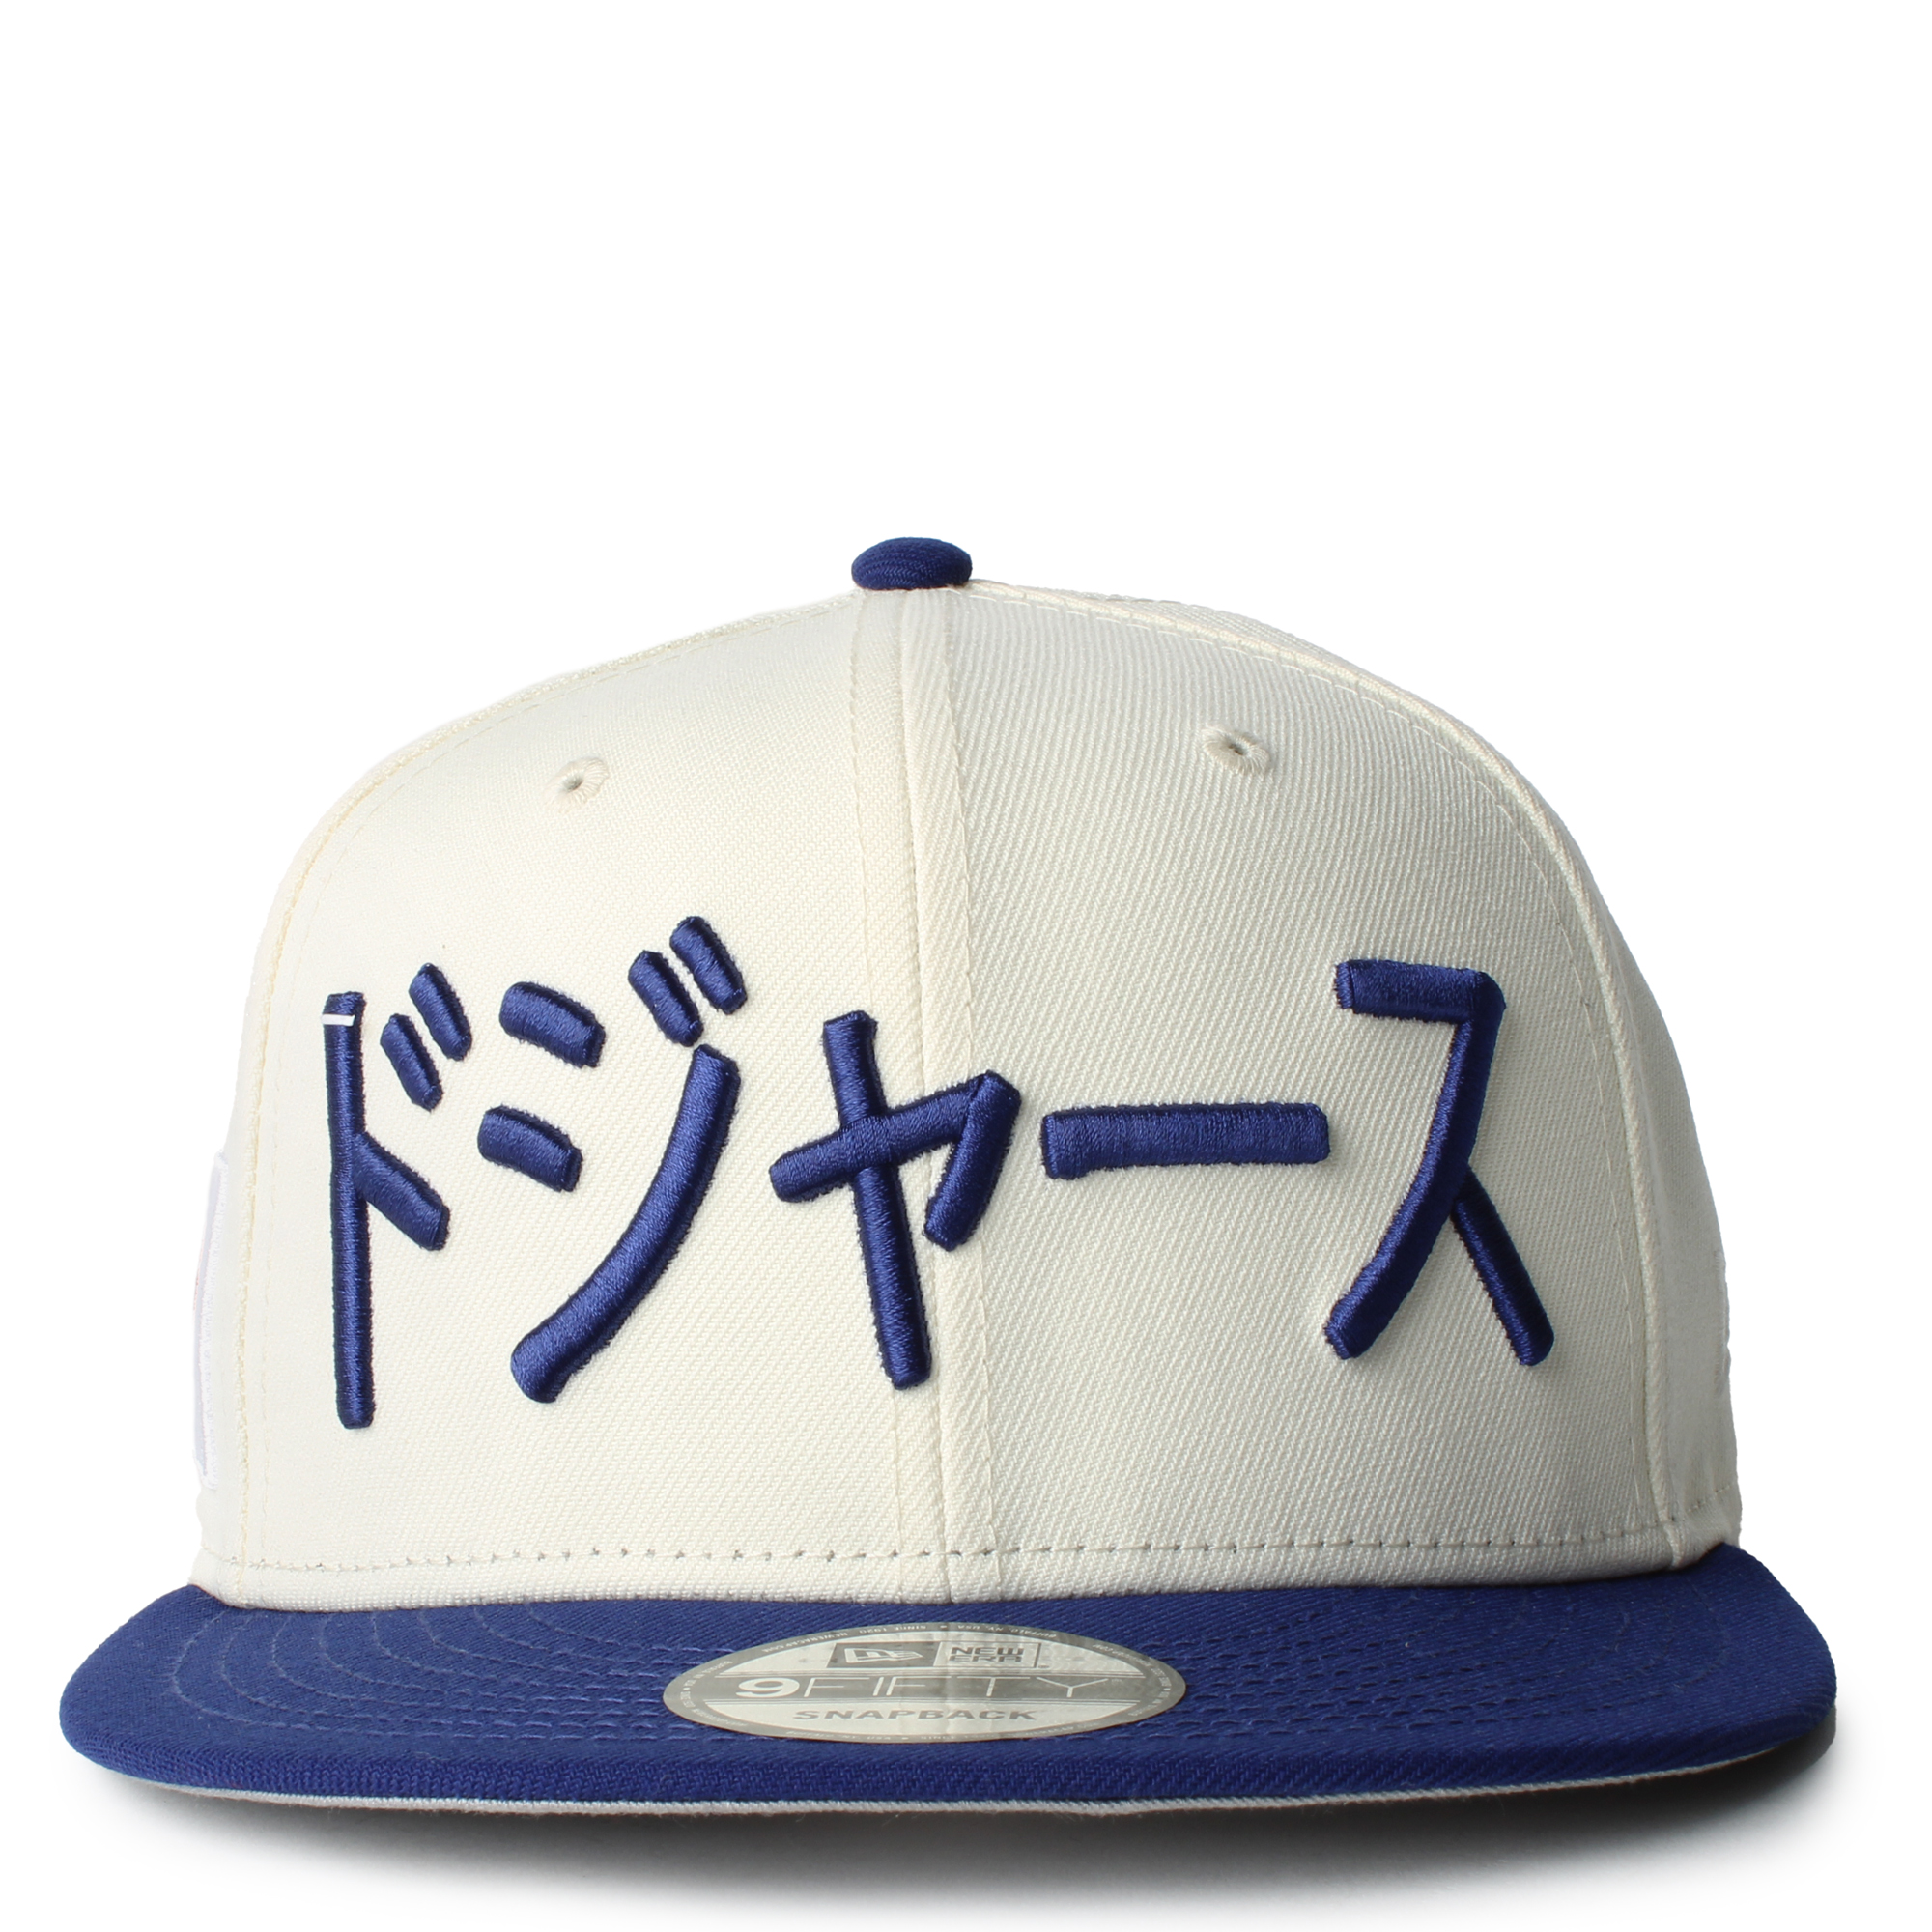 LOS ANGELES DODGERS JAPANESE WRITING 9FIFTY SNAPBACK HAT 70855896